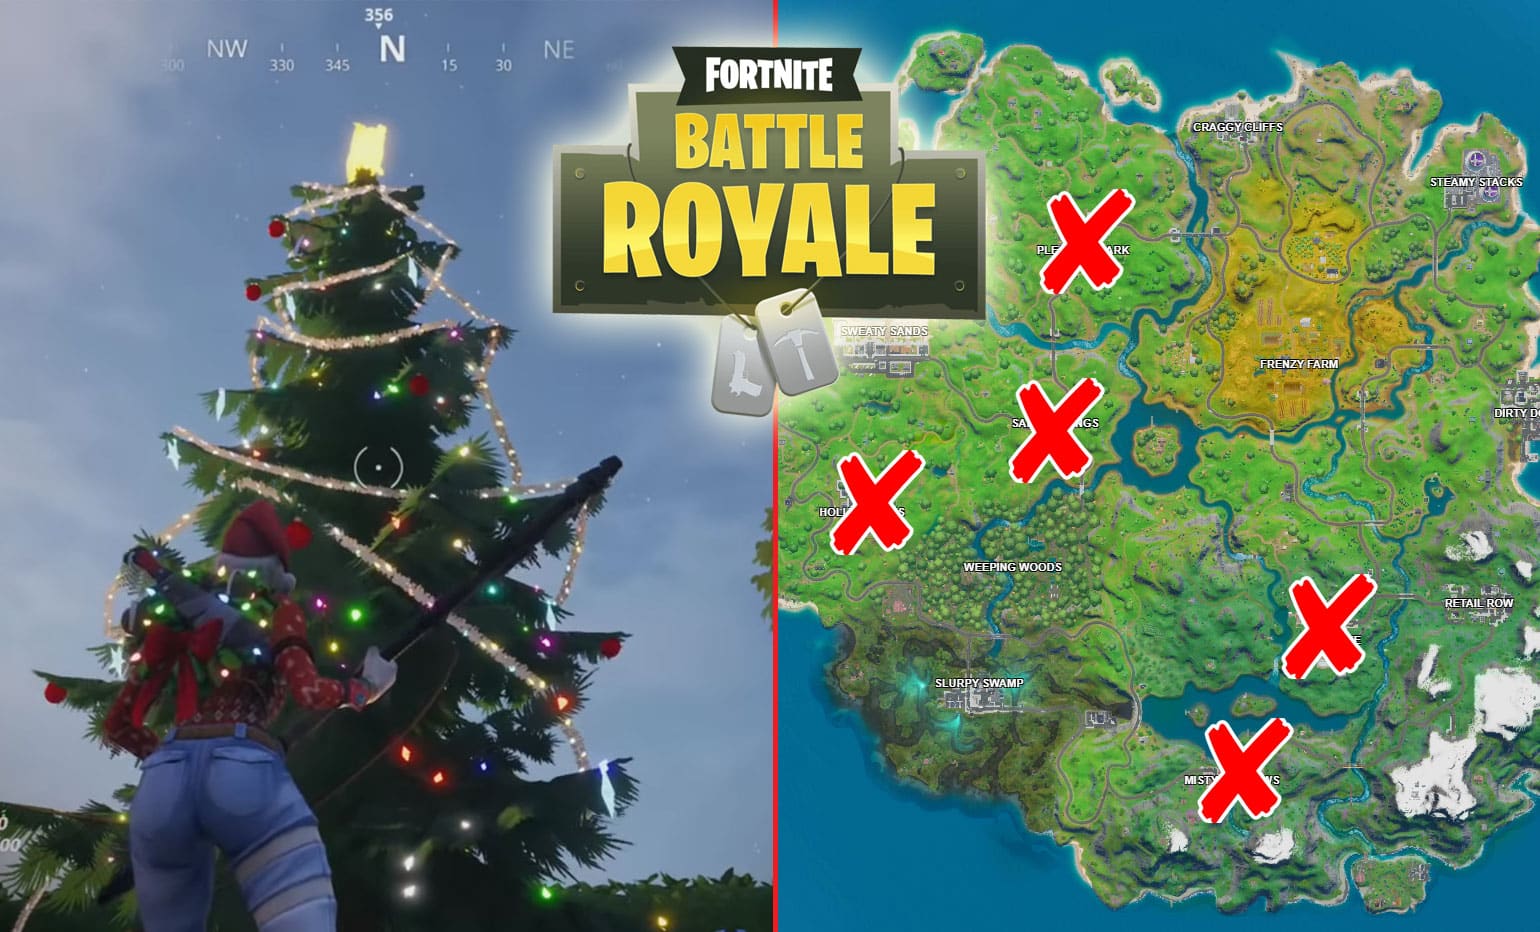 Where are the different holiday trees in fortnite Chapter 2?